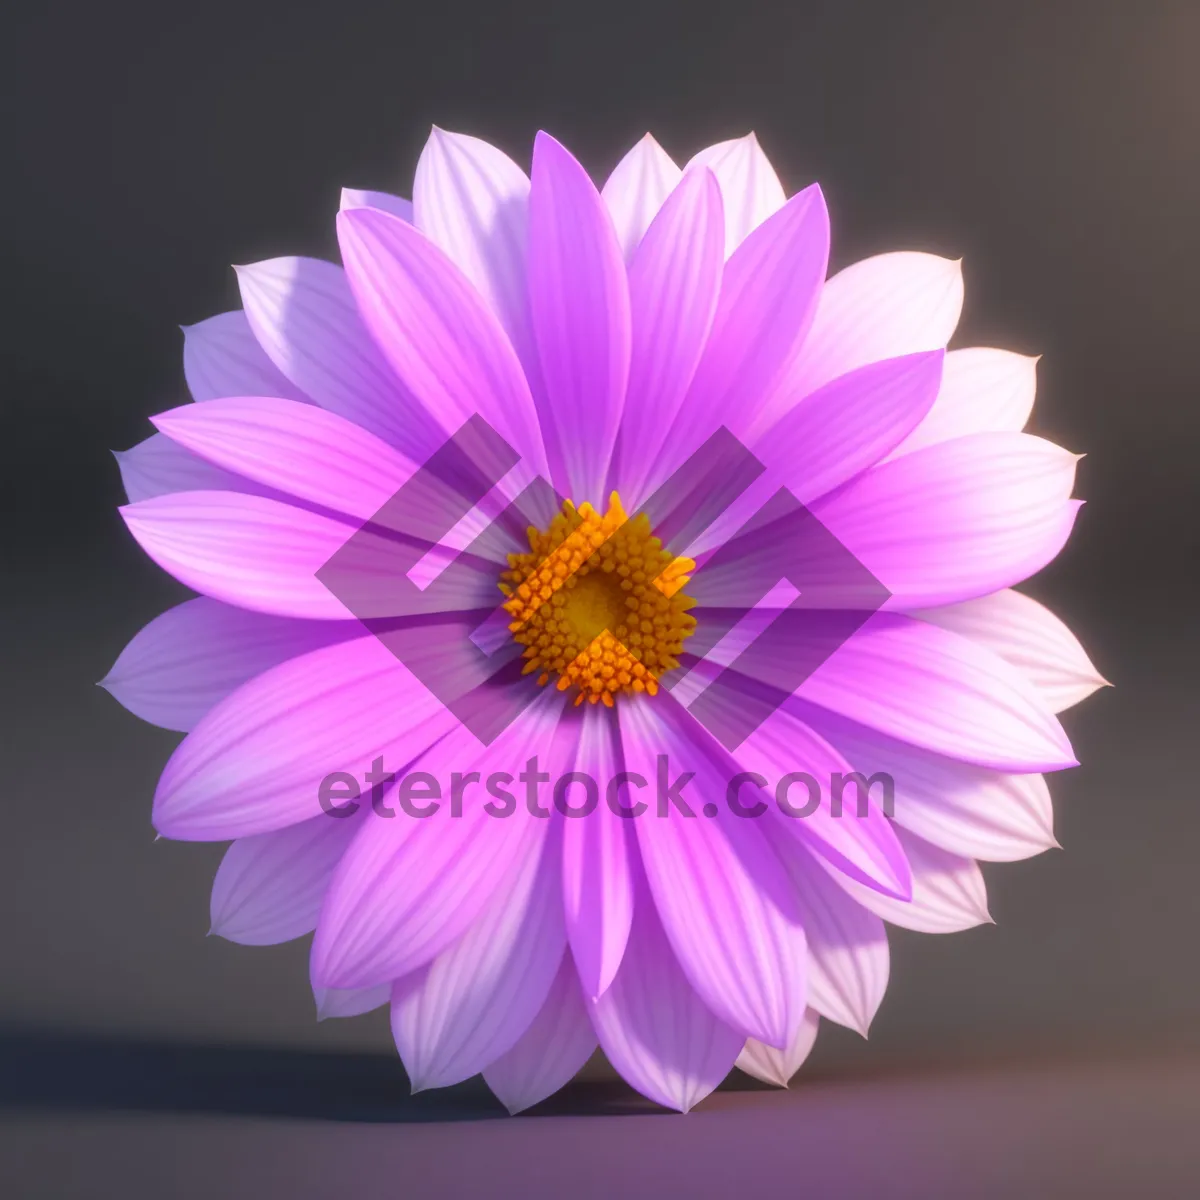 Picture of Daisy Bloom: Vibrant Floral Beauty in Full Bloom